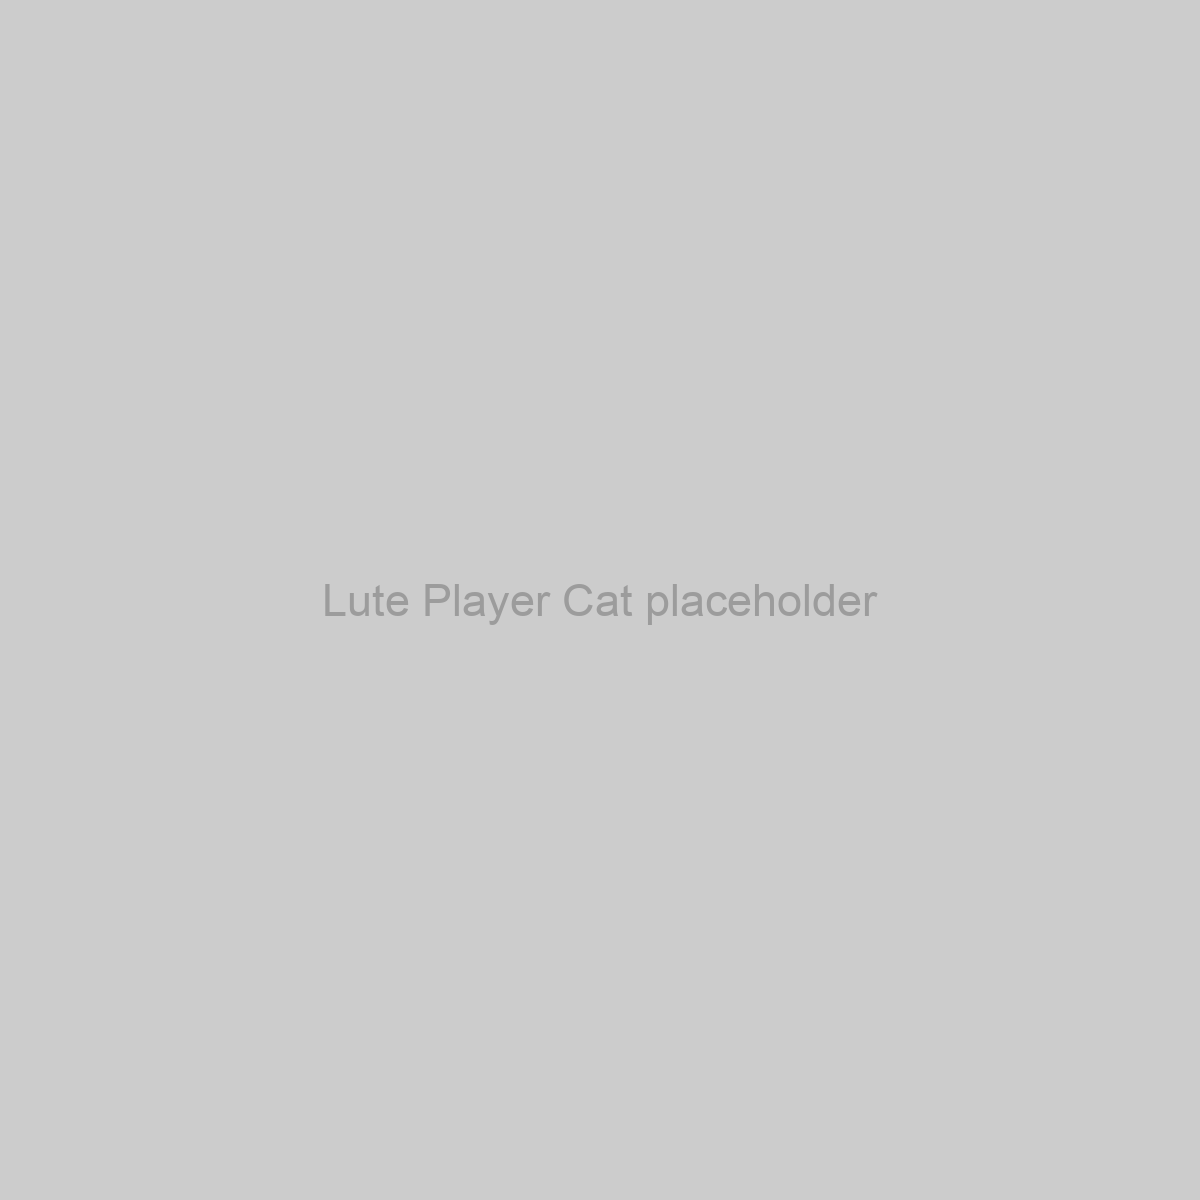 Lute Player Cat Placeholder Image